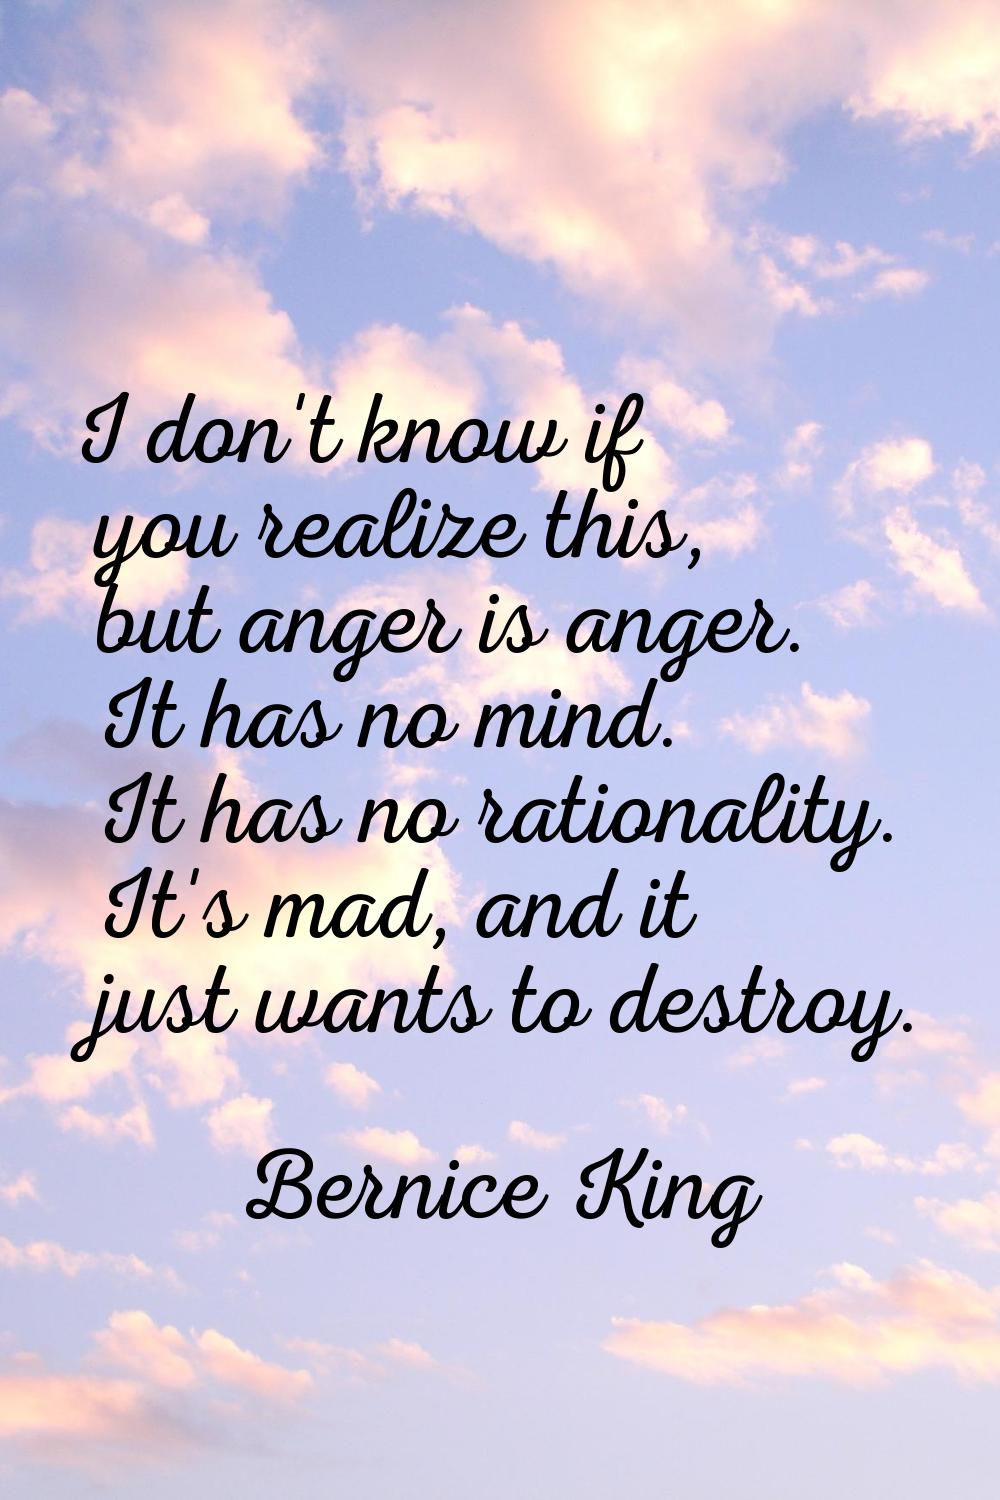 I don't know if you realize this, but anger is anger. It has no mind. It has no rationality. It's m